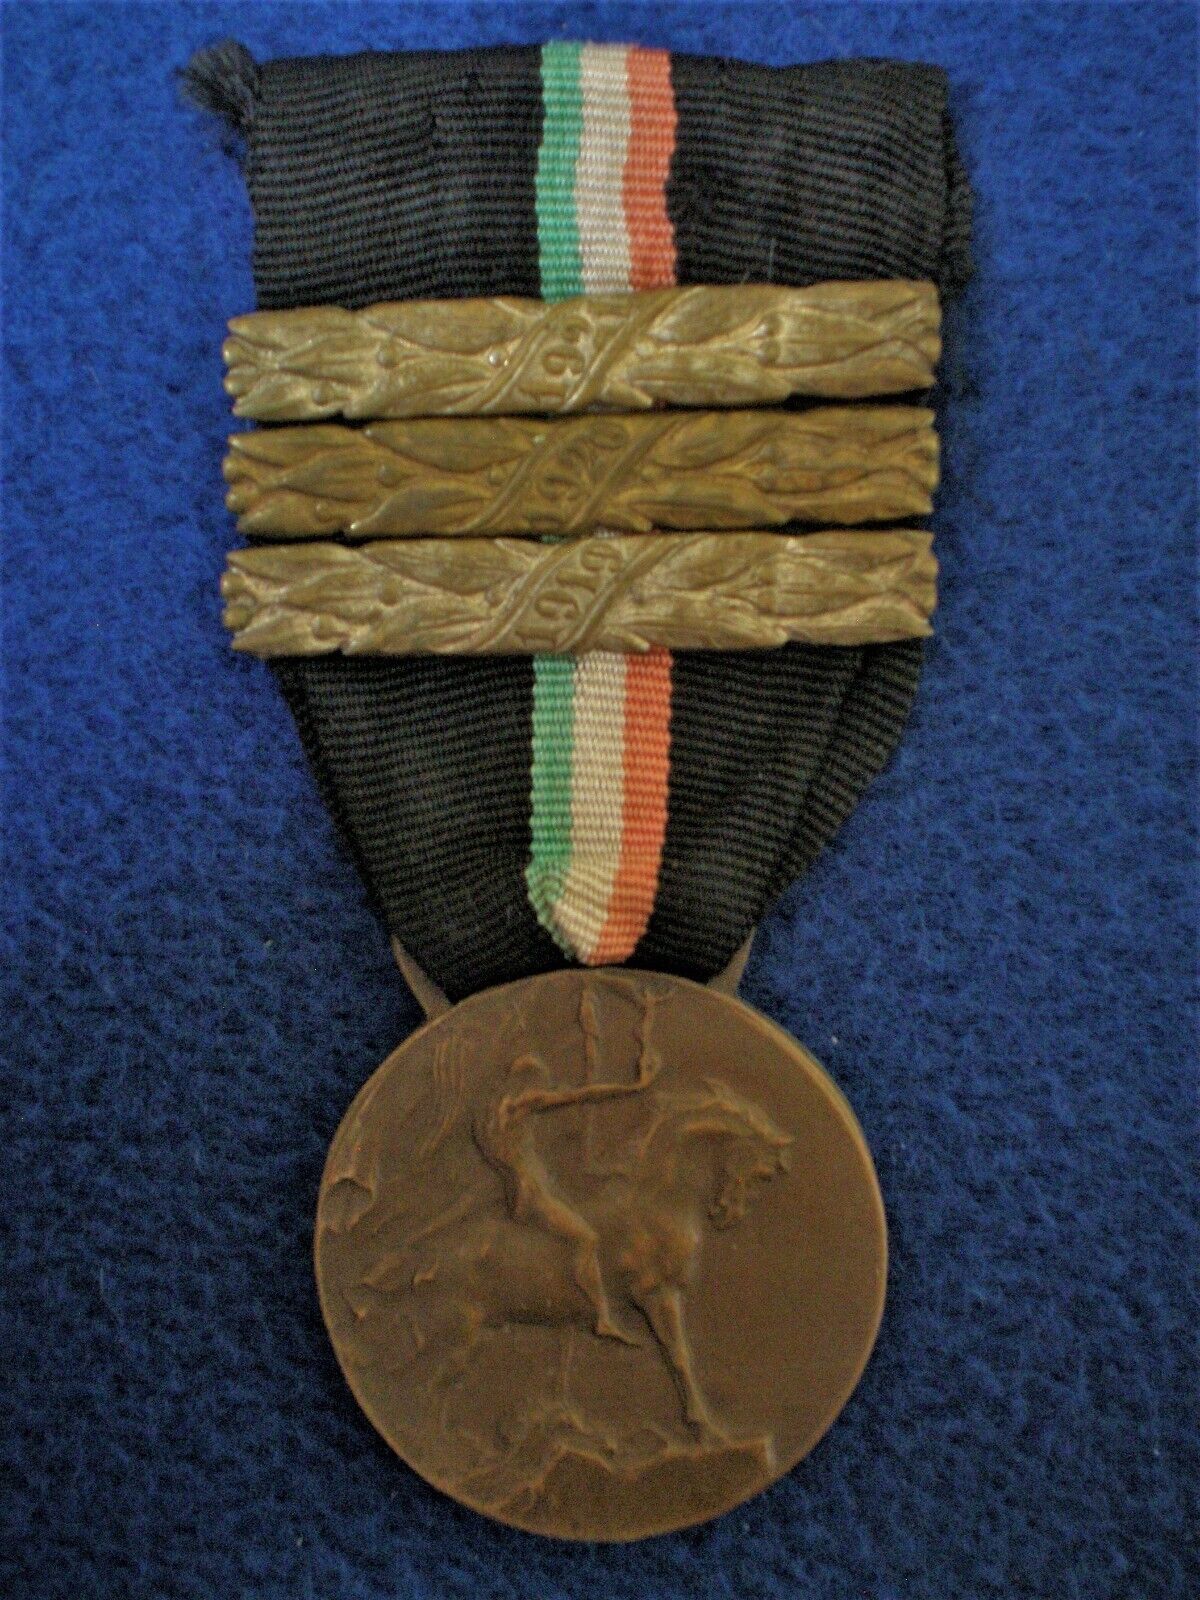 Italy: Commemorative Medal of the Fascist Campaign 1919-1922